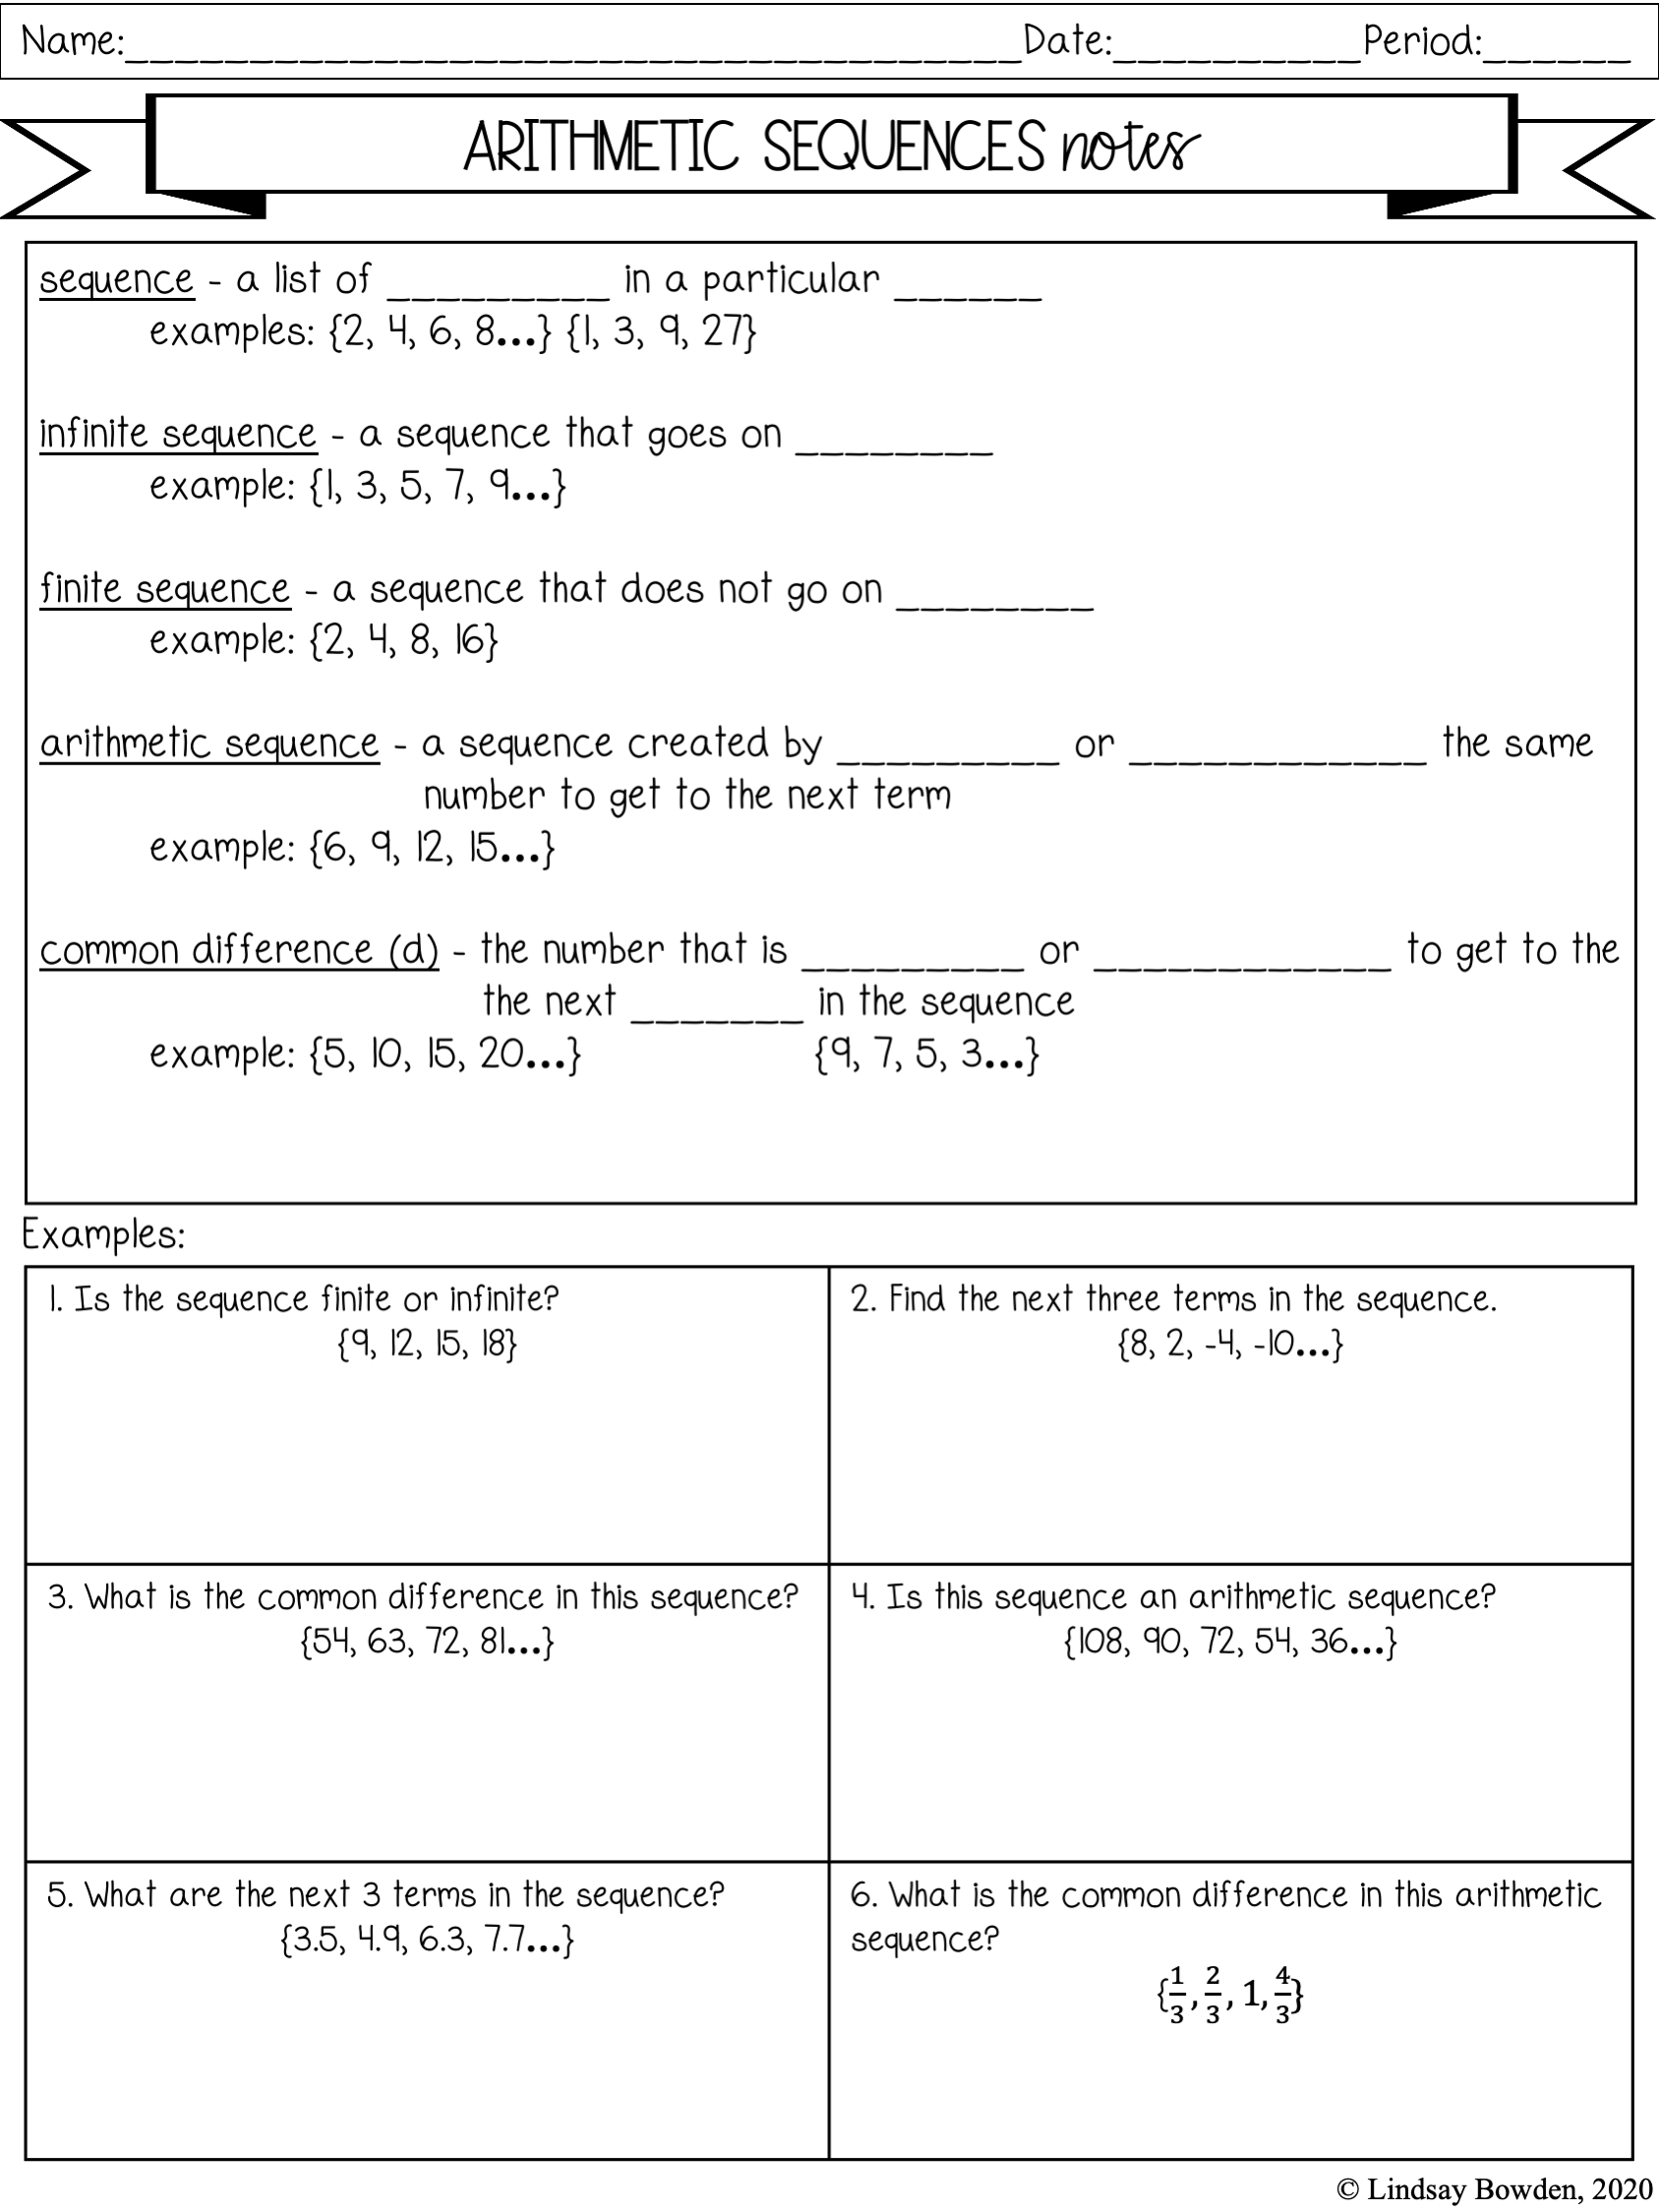 Arithmetic Sequences Notes and Worksheets - Lindsay Bowden Throughout Arithmetic Sequences And Series Worksheet